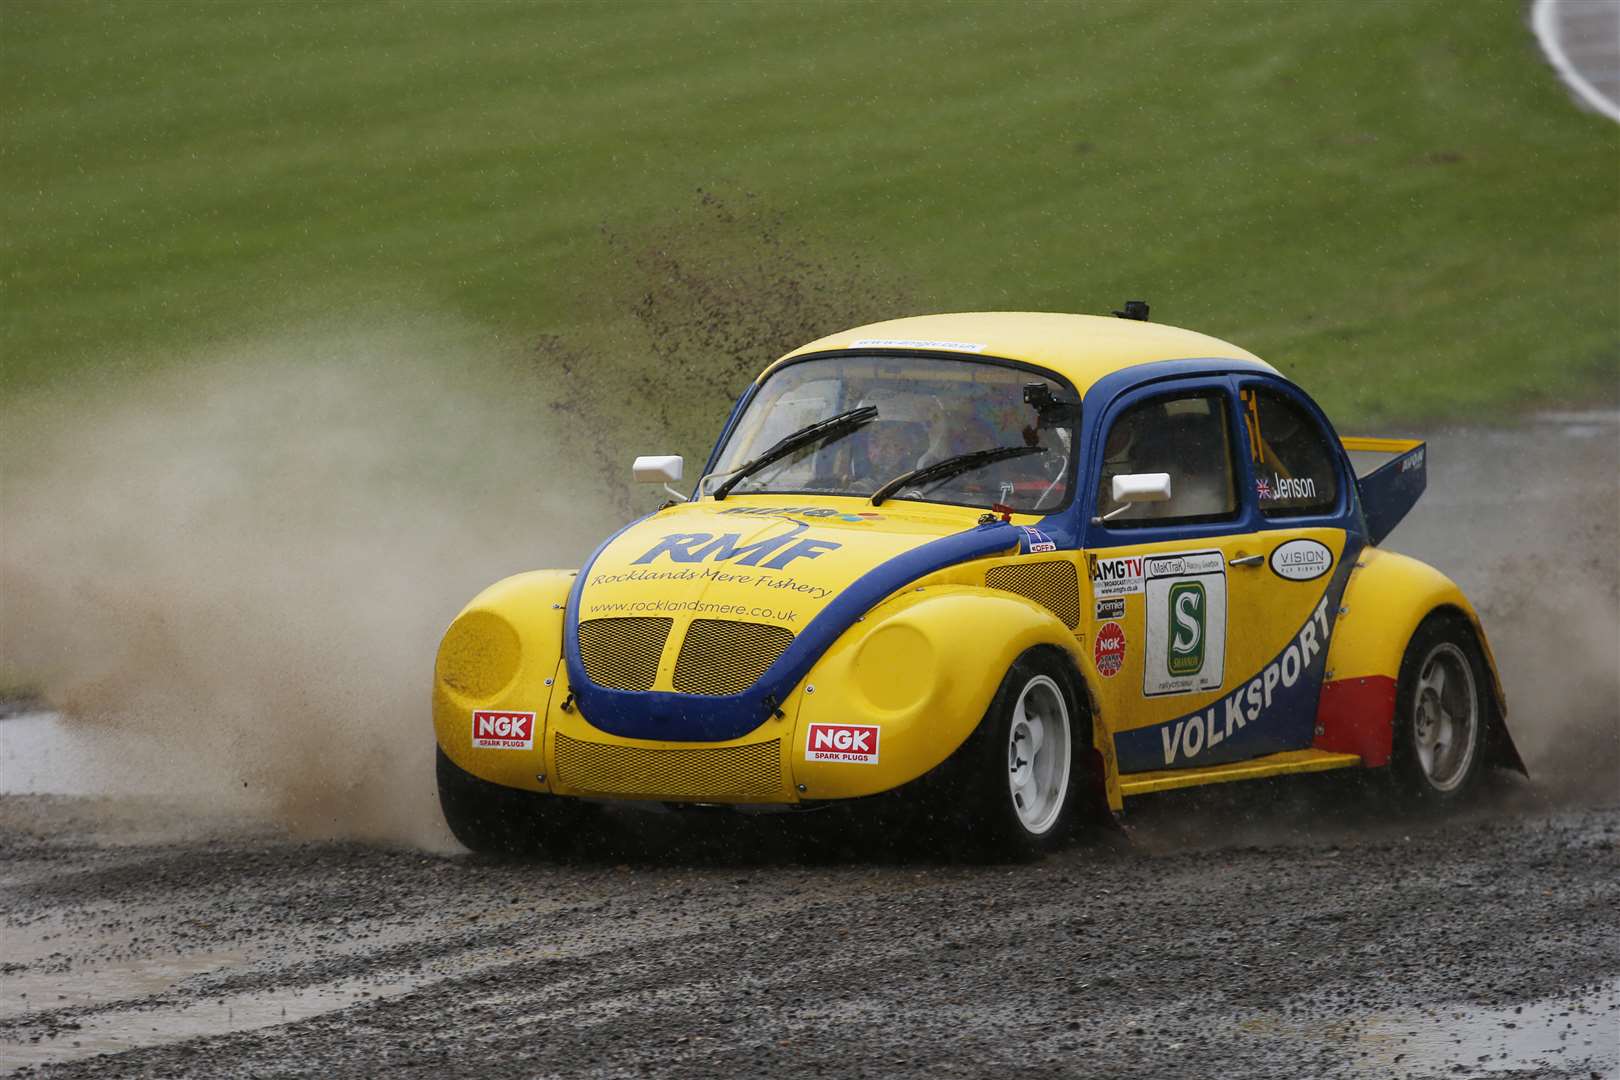 Button and Coulthard handled the VW Beetle